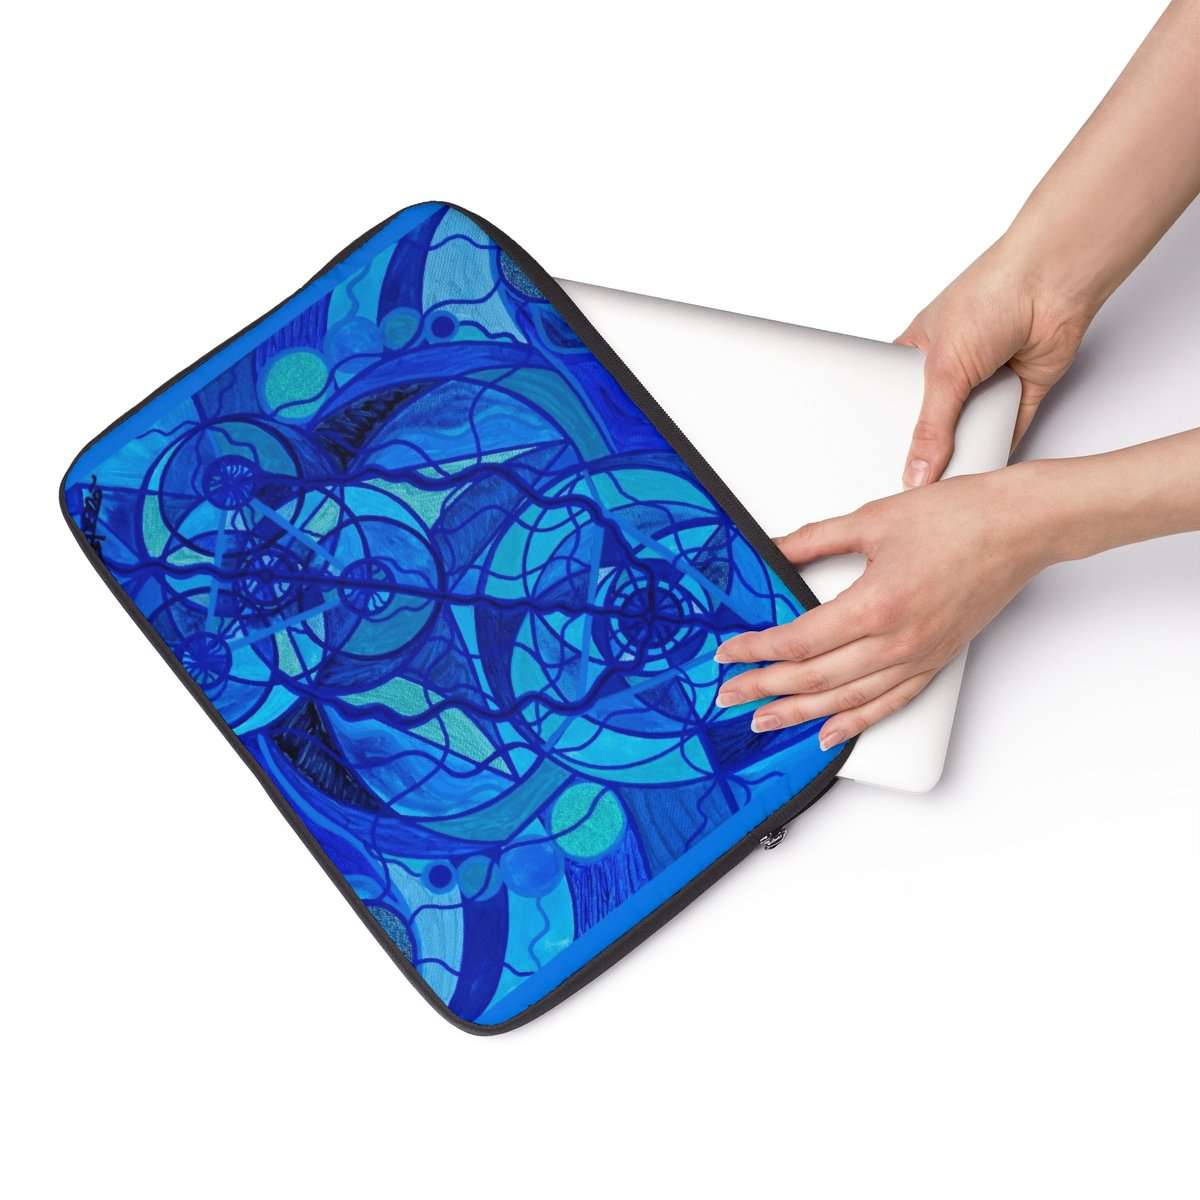 the-place-to-buy-arcturian-calming-grid-laptop-sleeve-online-sale_3.jpg